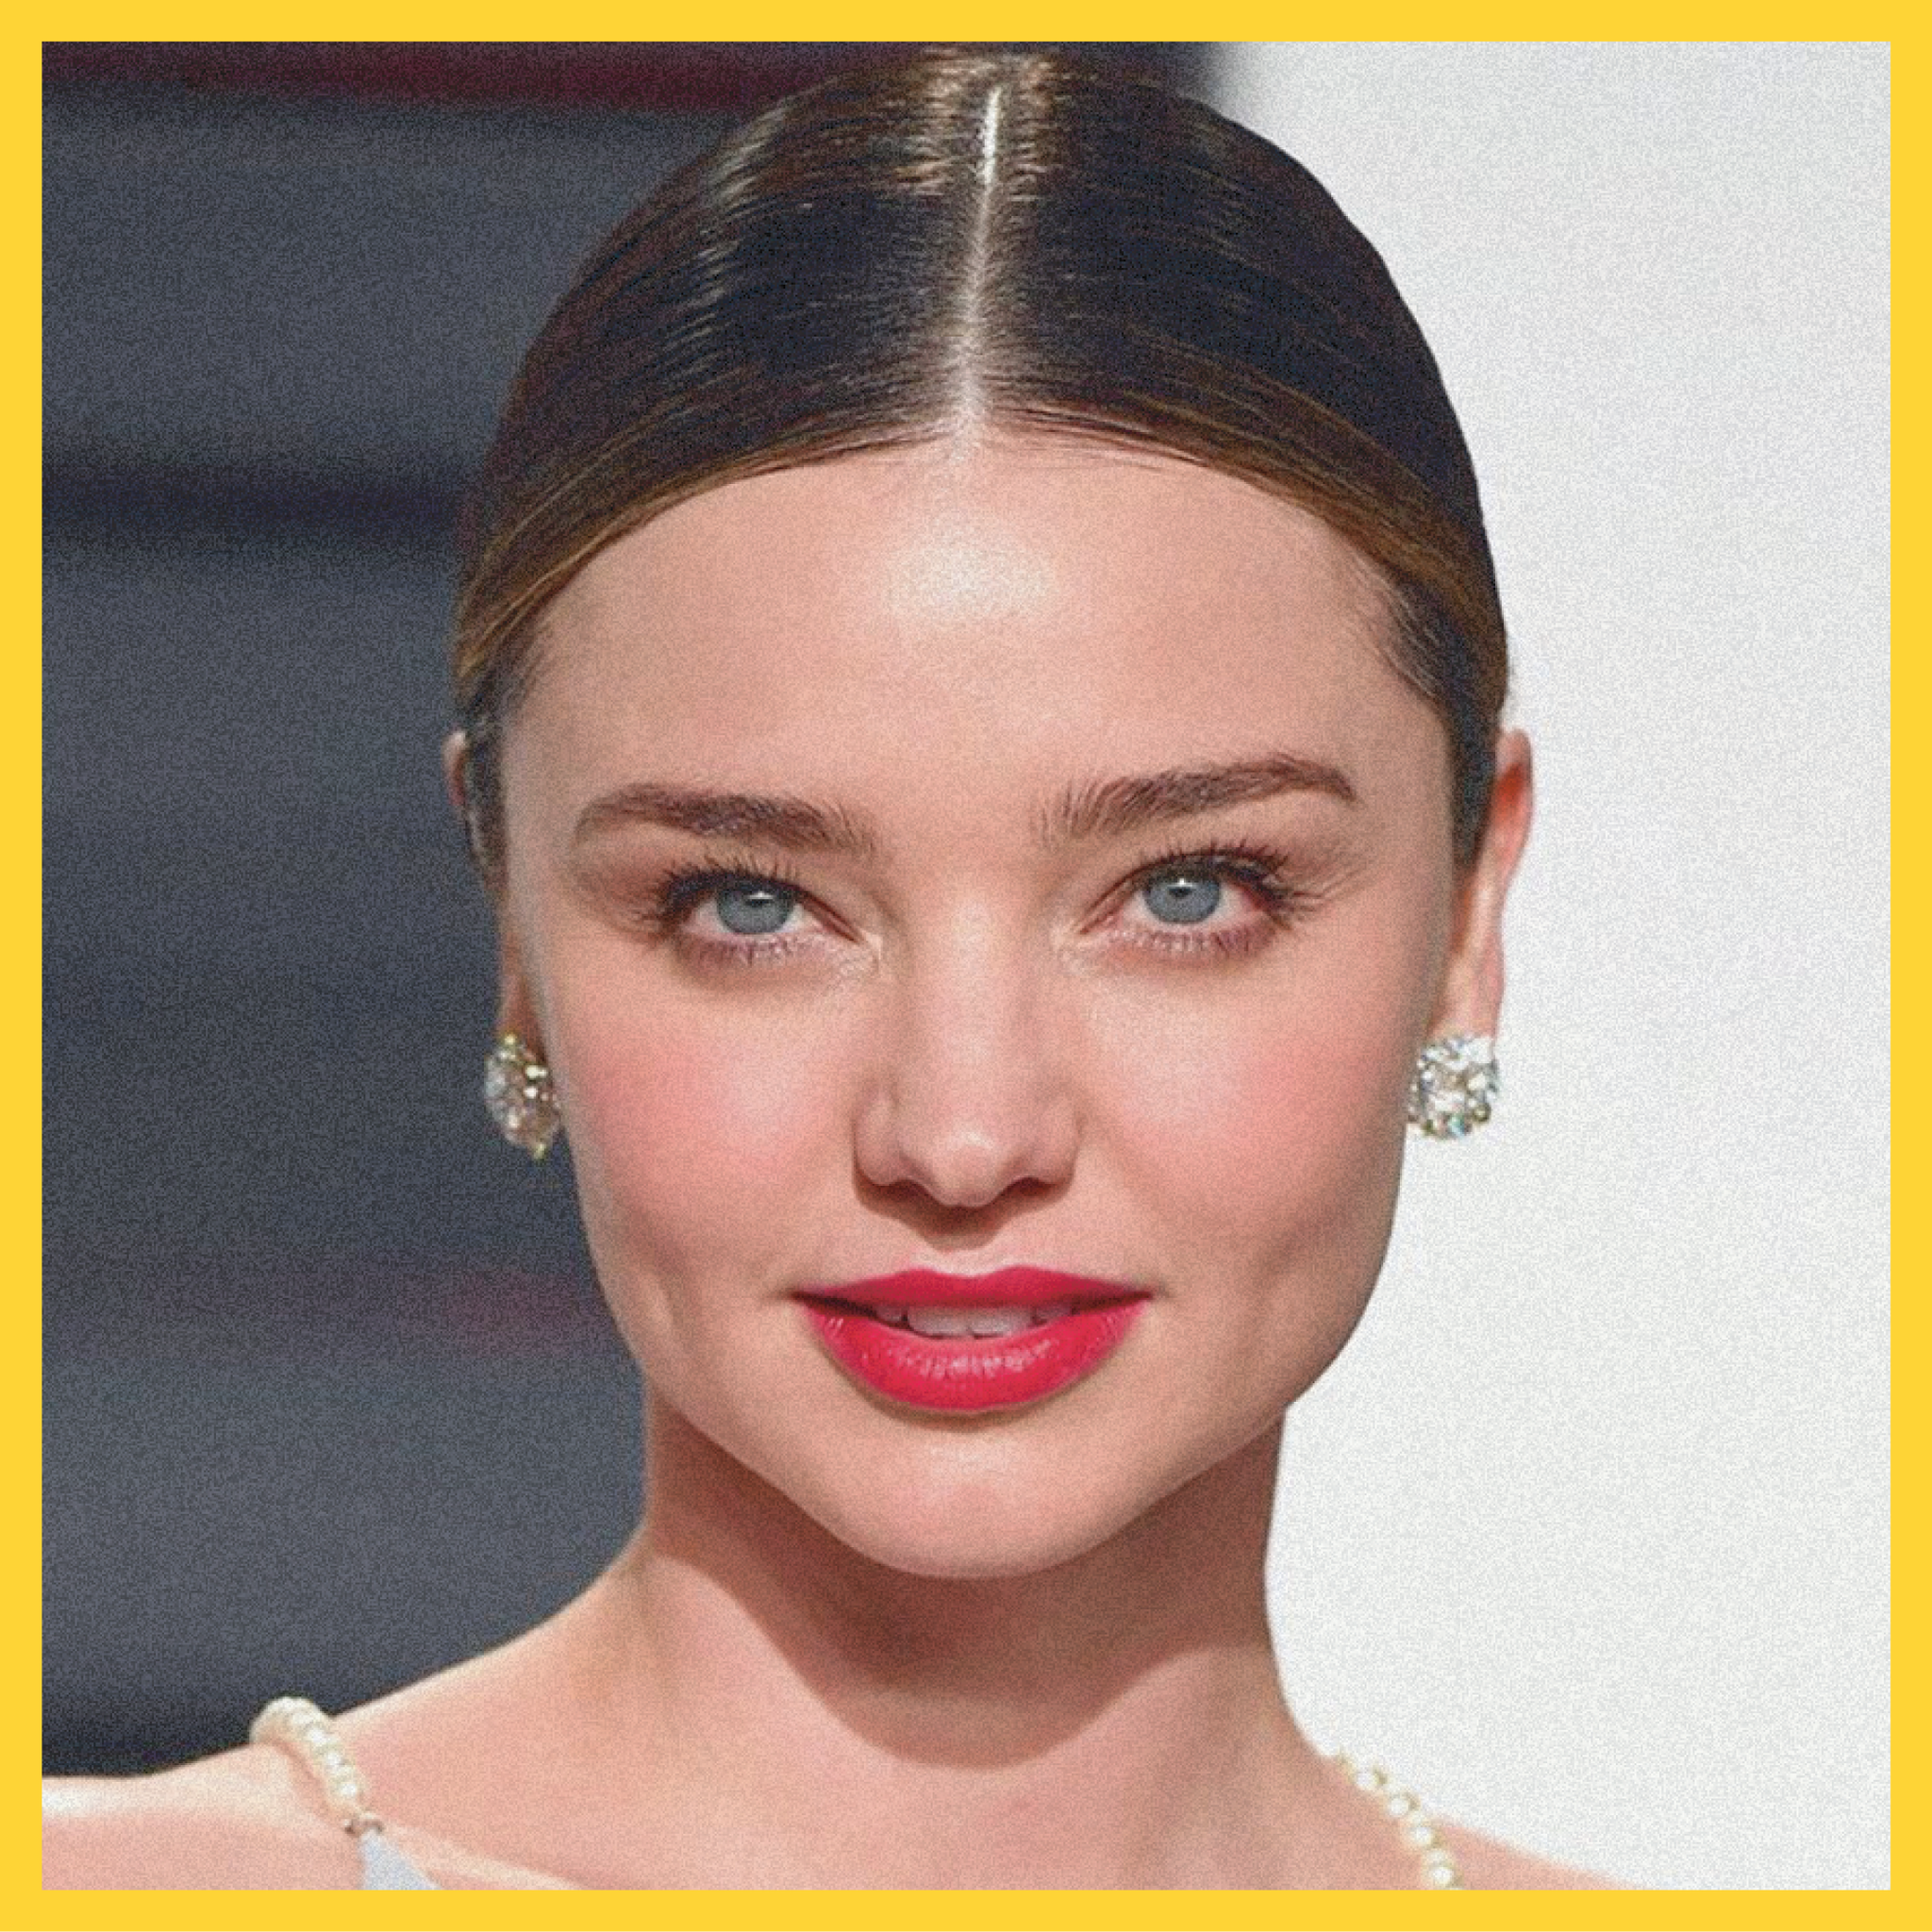 Miranda Kerr swears by this incredible foundation for covering her  pigmentation